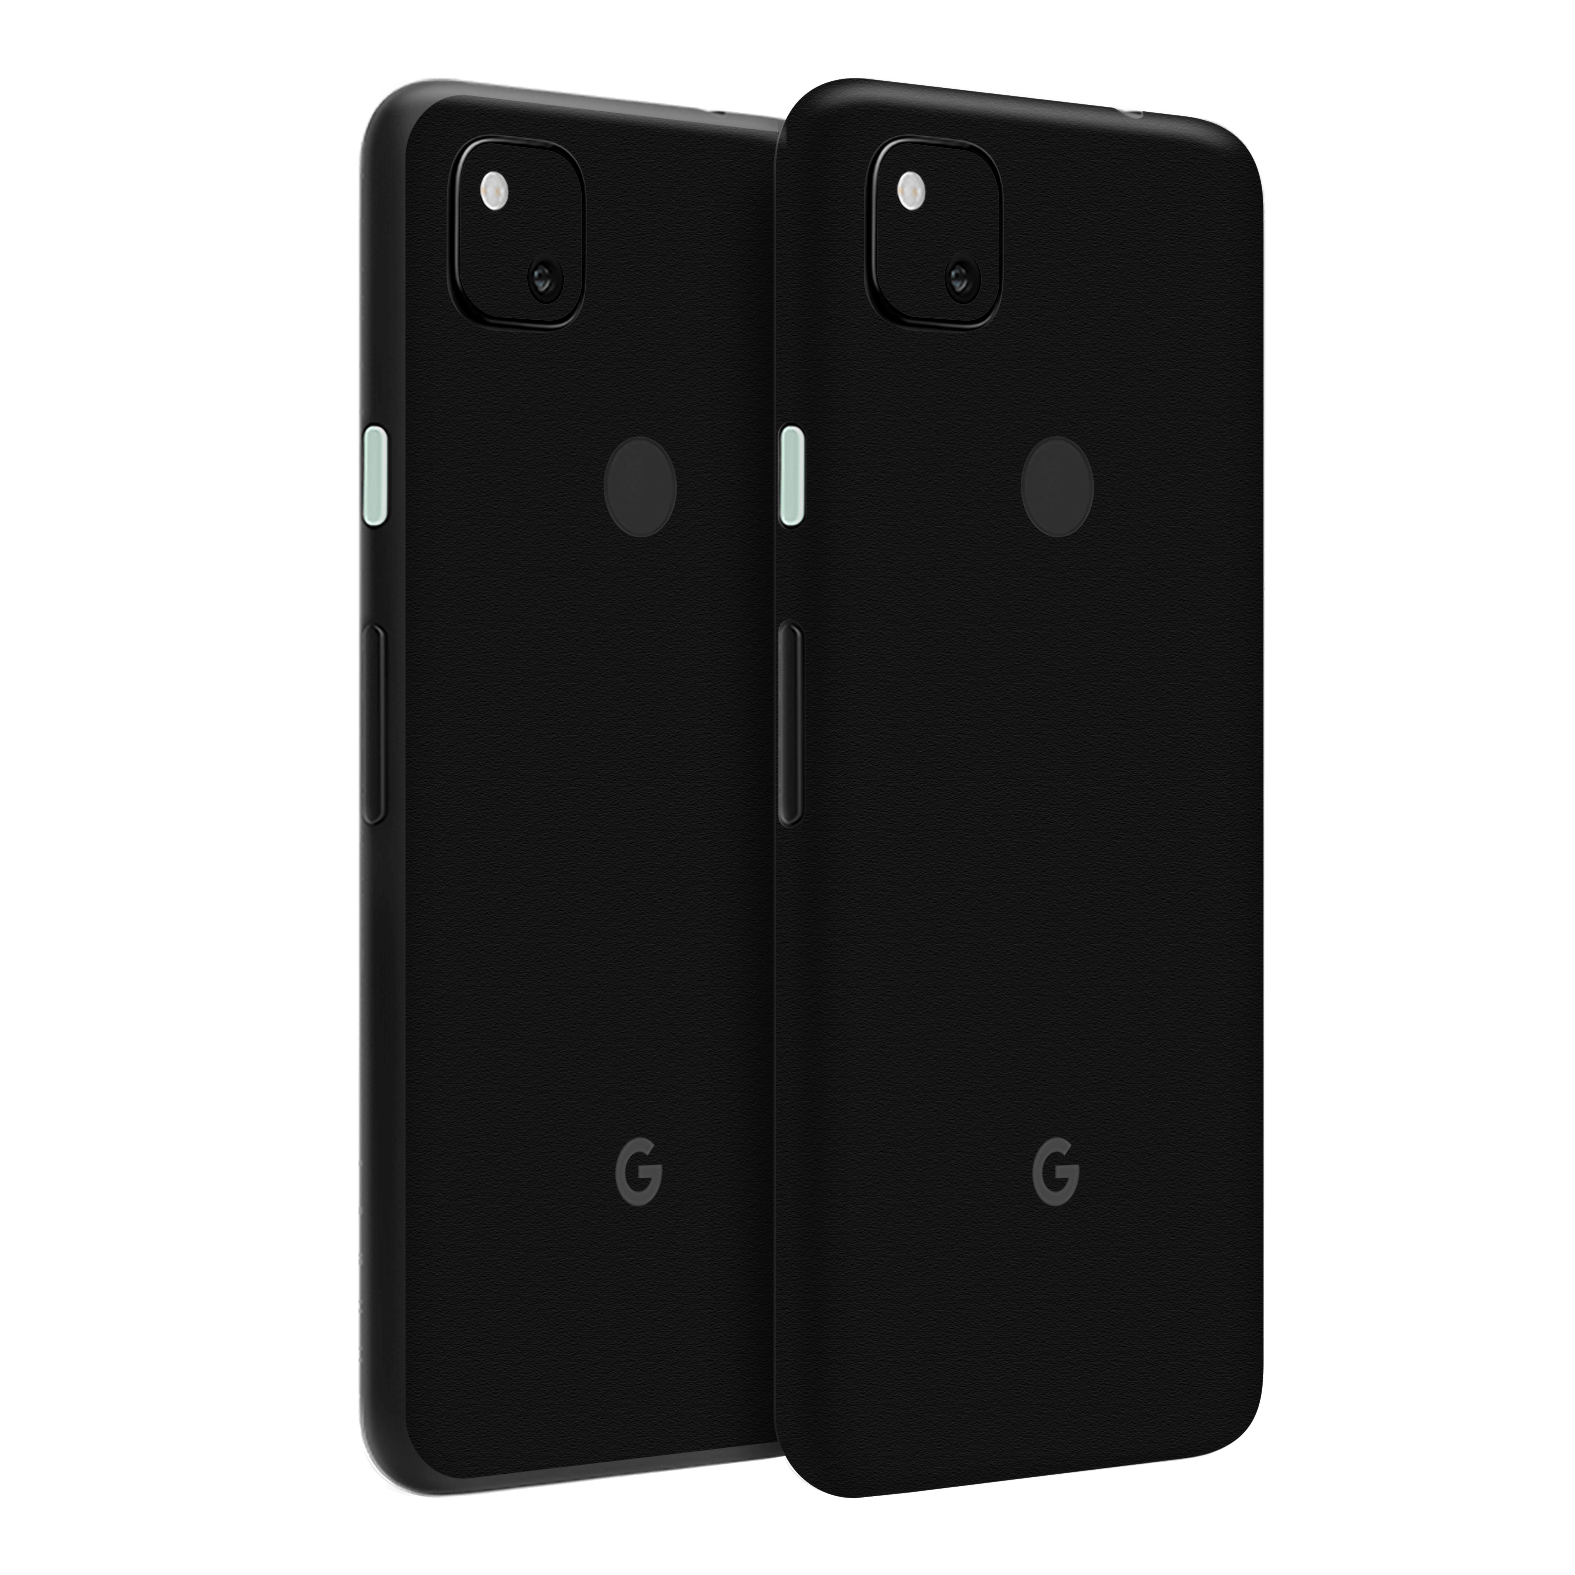 Pixel 4a Luxuria Raven Black 3D Textured Skin Wrap Sticker Decal Cover Protector by EasySkinz | EasySkinz.com